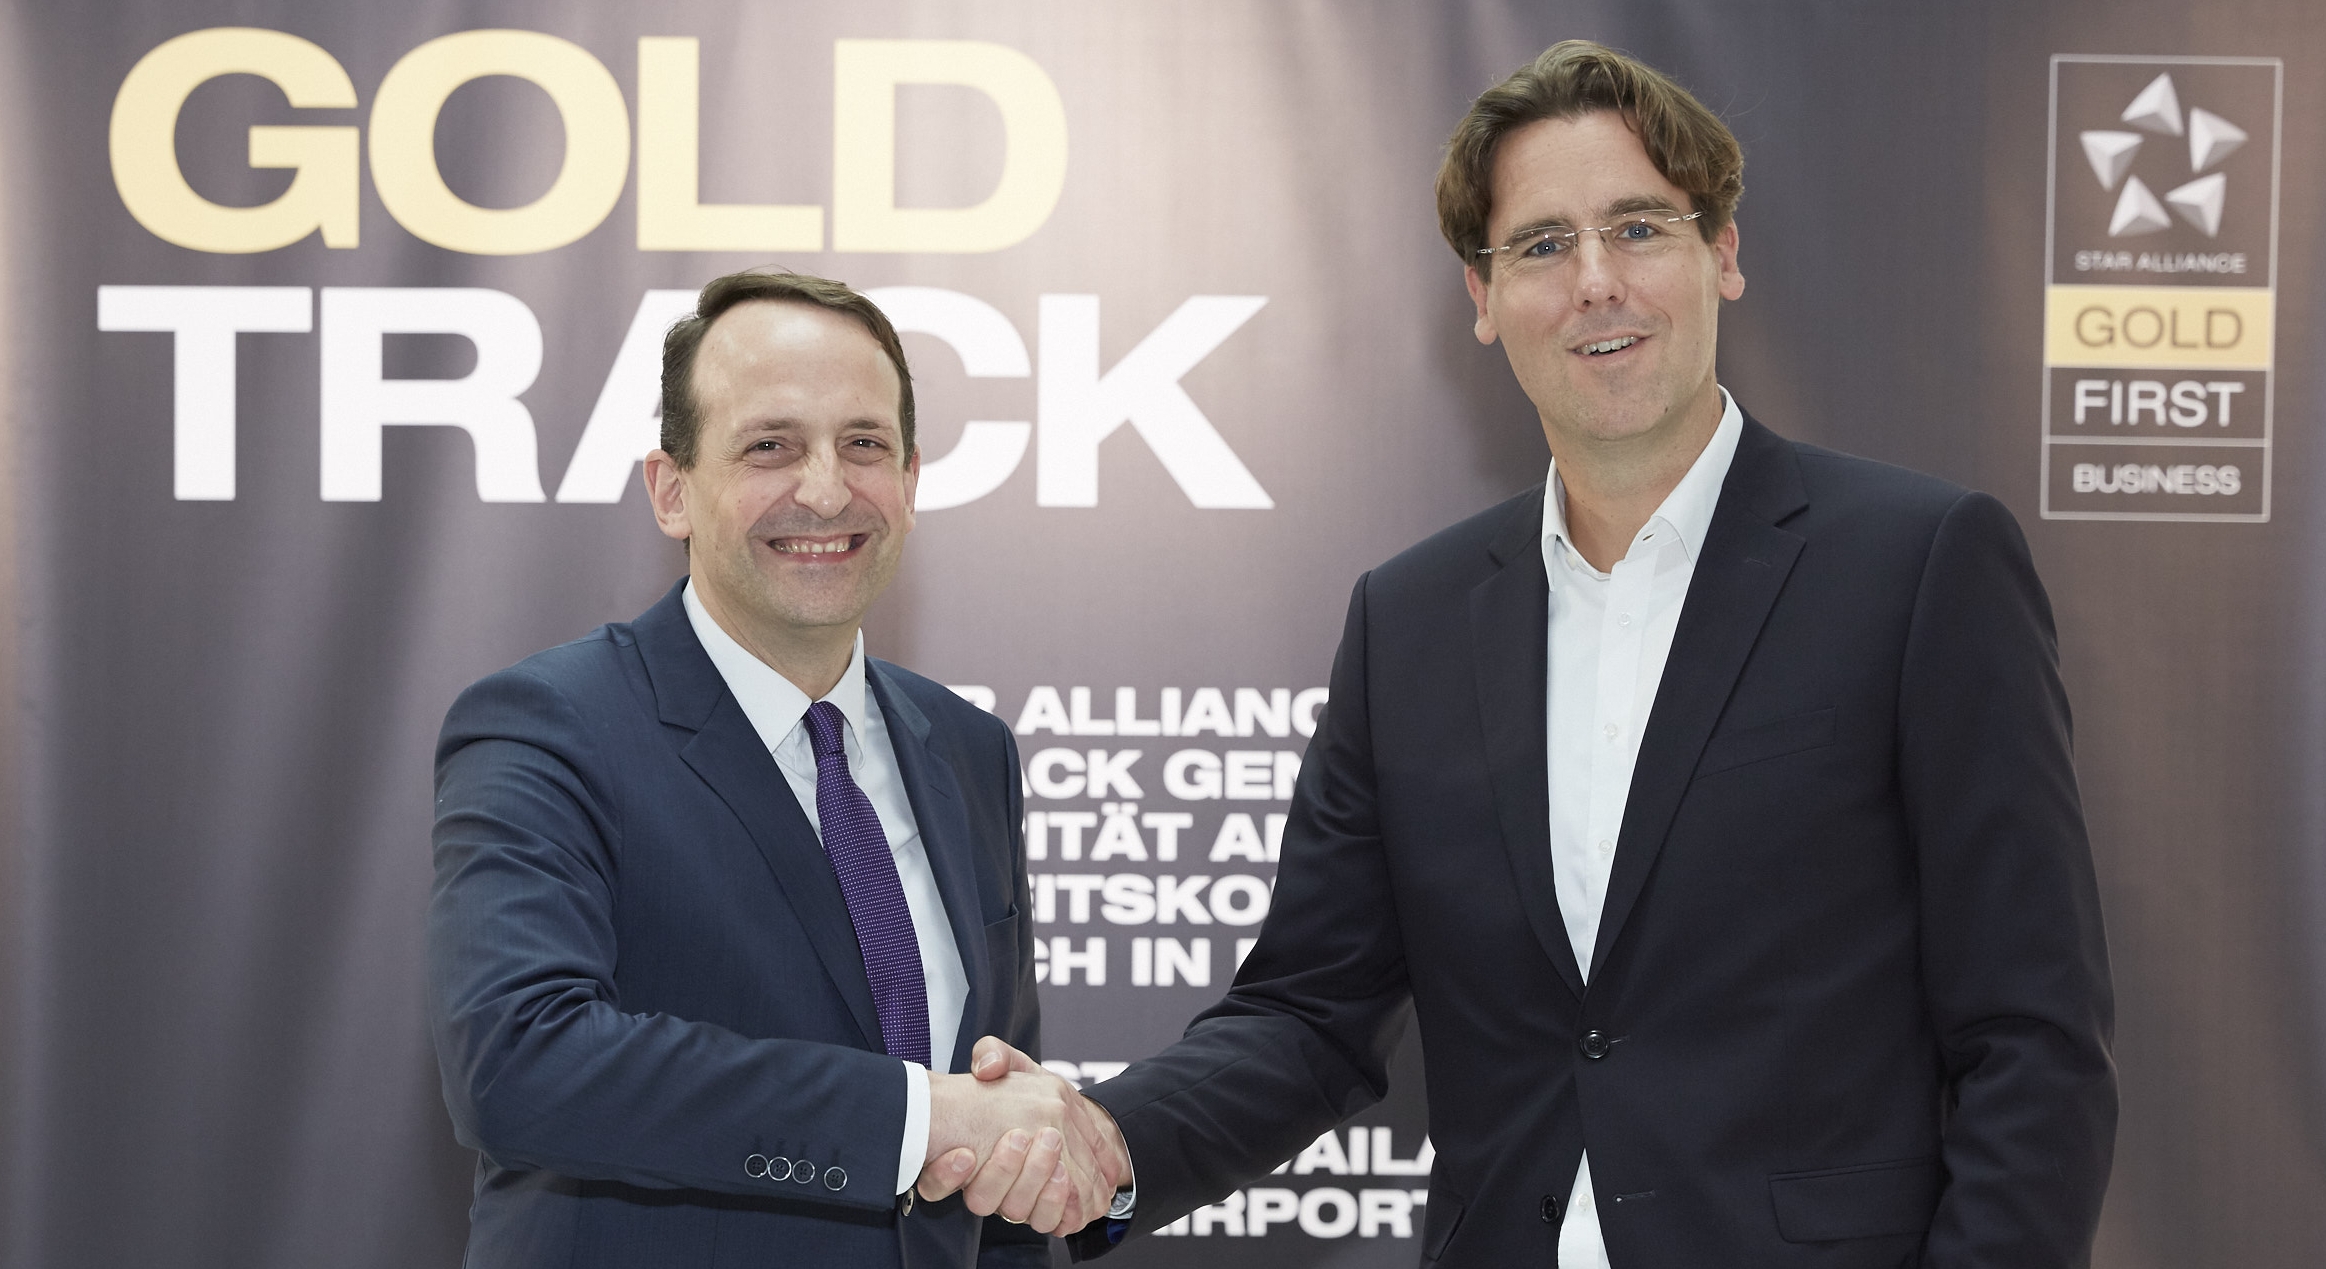 Senior Executive Vice President at Fraport AG for Airside & Terminal Management, Corporate Safety & Security Pierre Dominique Prümm (left) shakes hands with Lufthansa's Björn Becker, Senior Director Product Management Ground & Digital Services after Star Alliance Gold Track branding is installed in Frankfurt airport